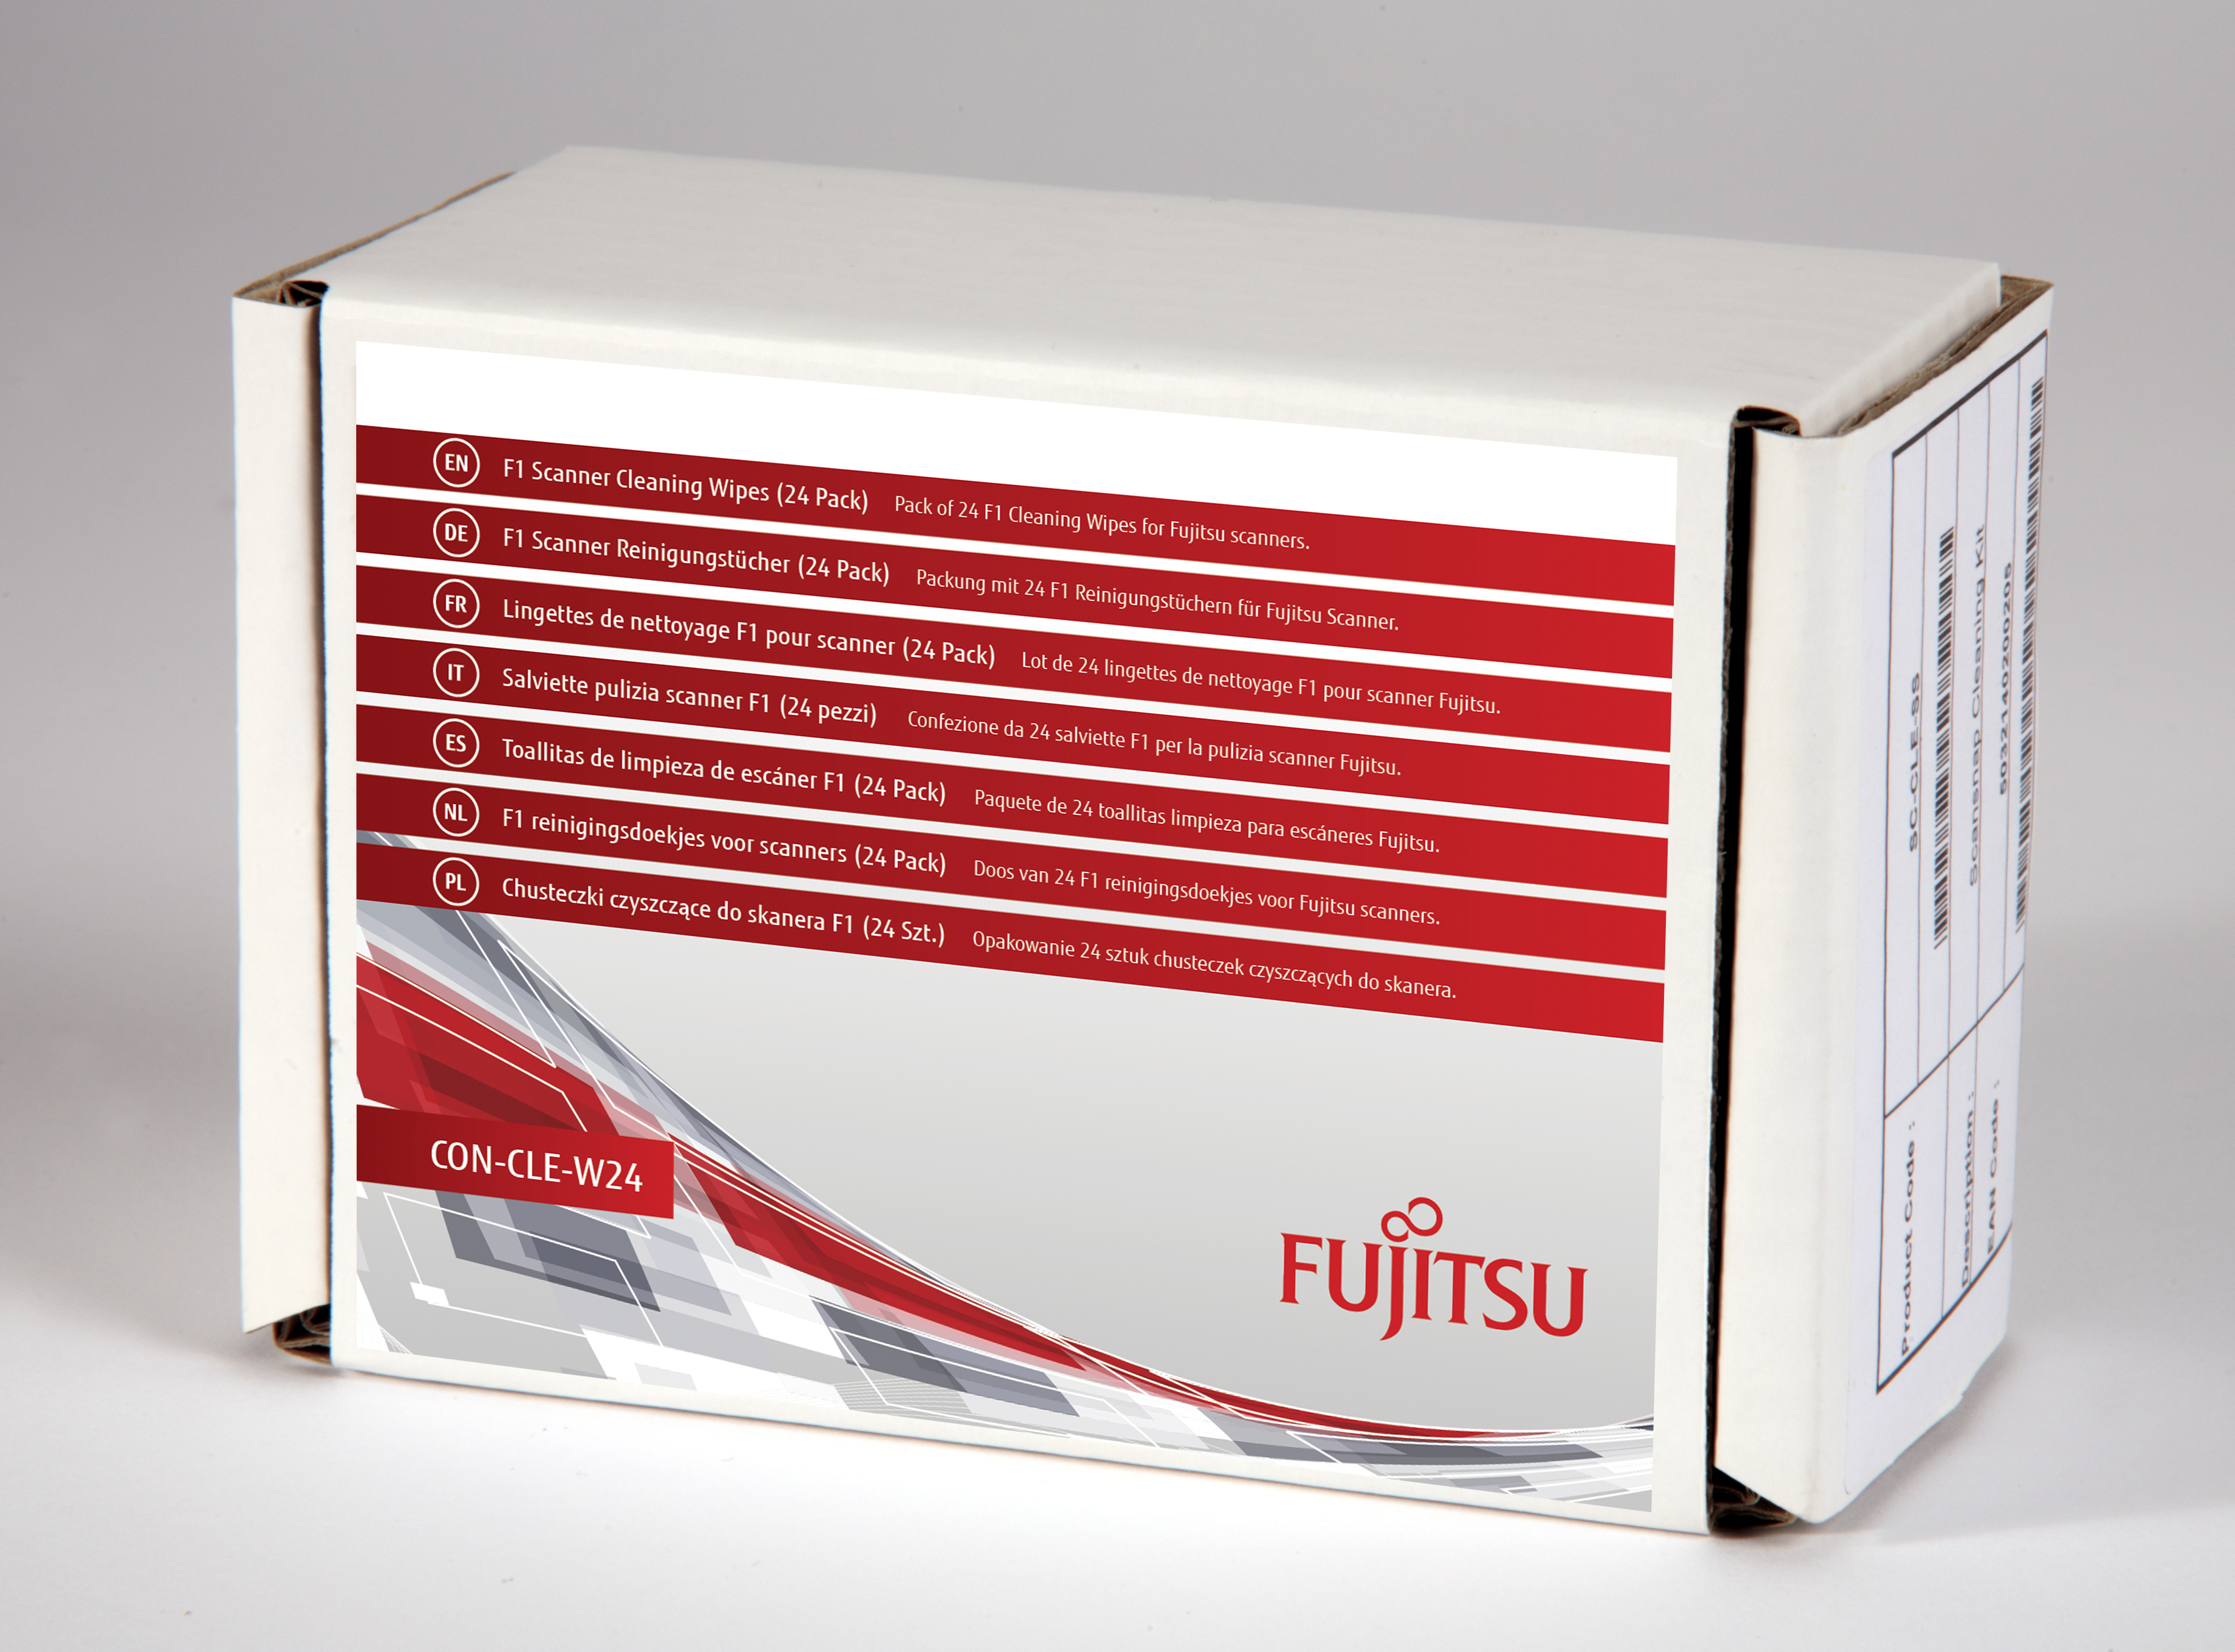 Con-cle-w24 fujitsu Scansnap Cleaning Kit - NA01